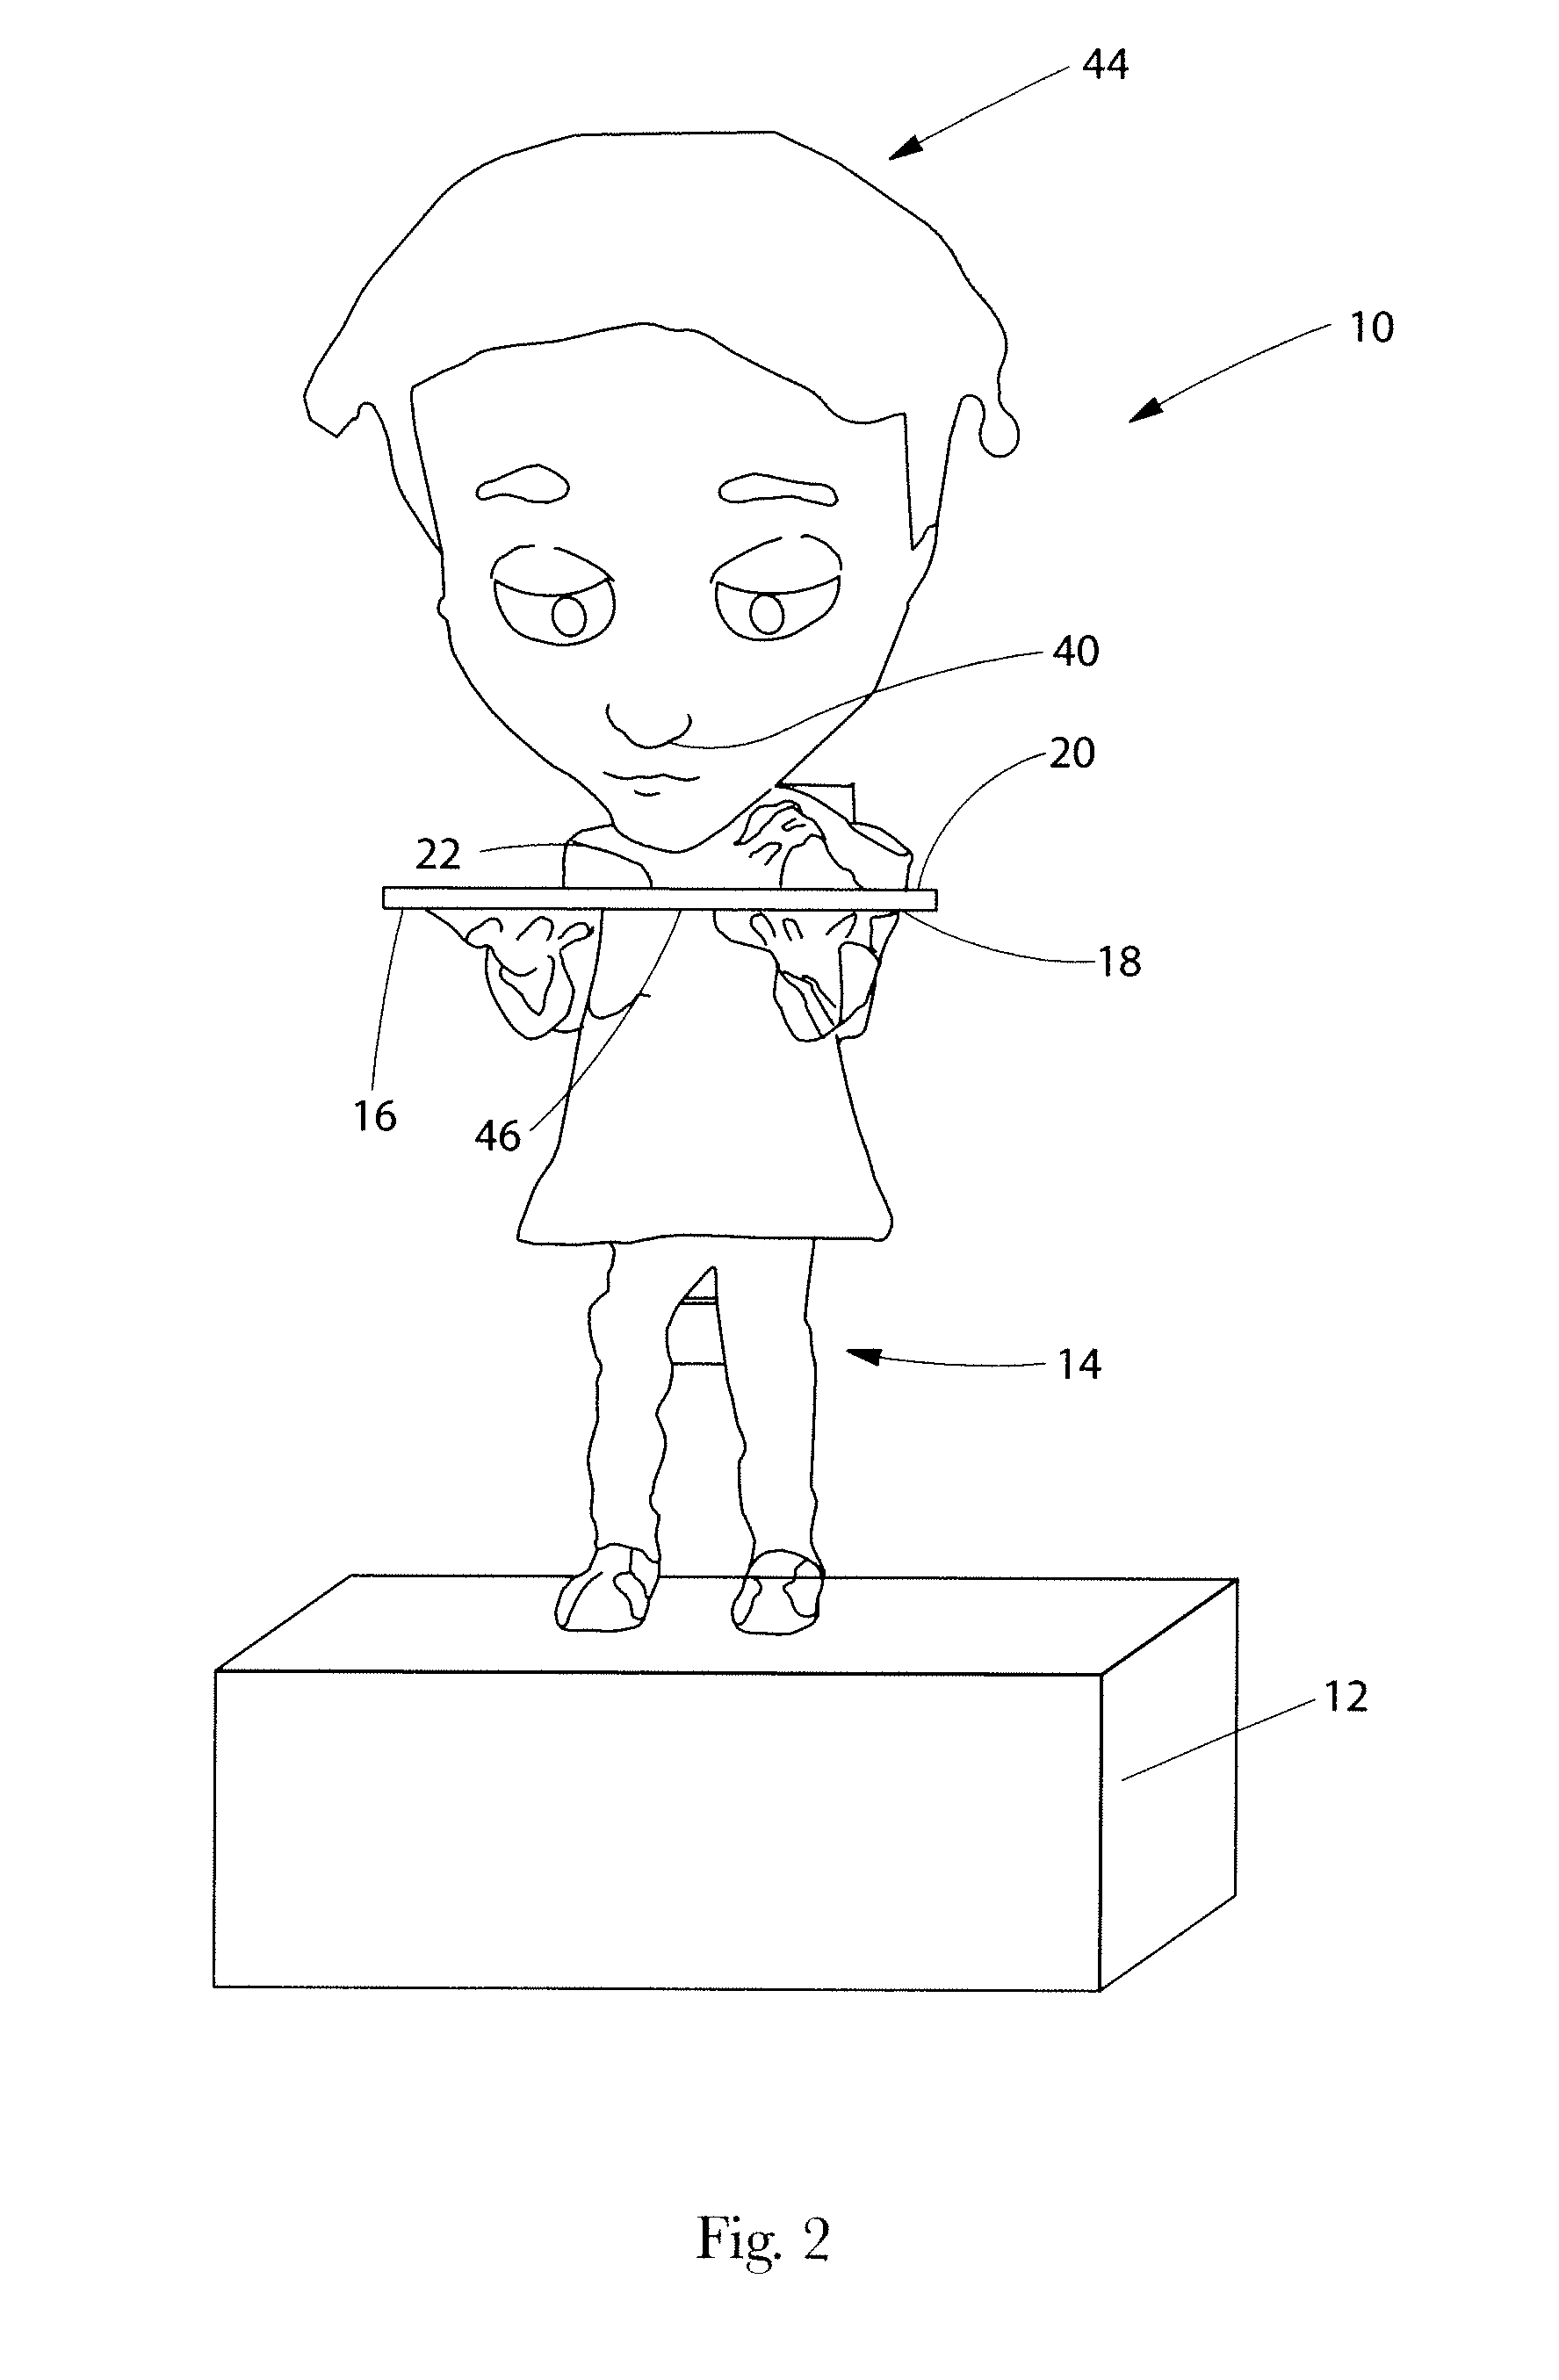 Process for demonstrating tissue product break-through